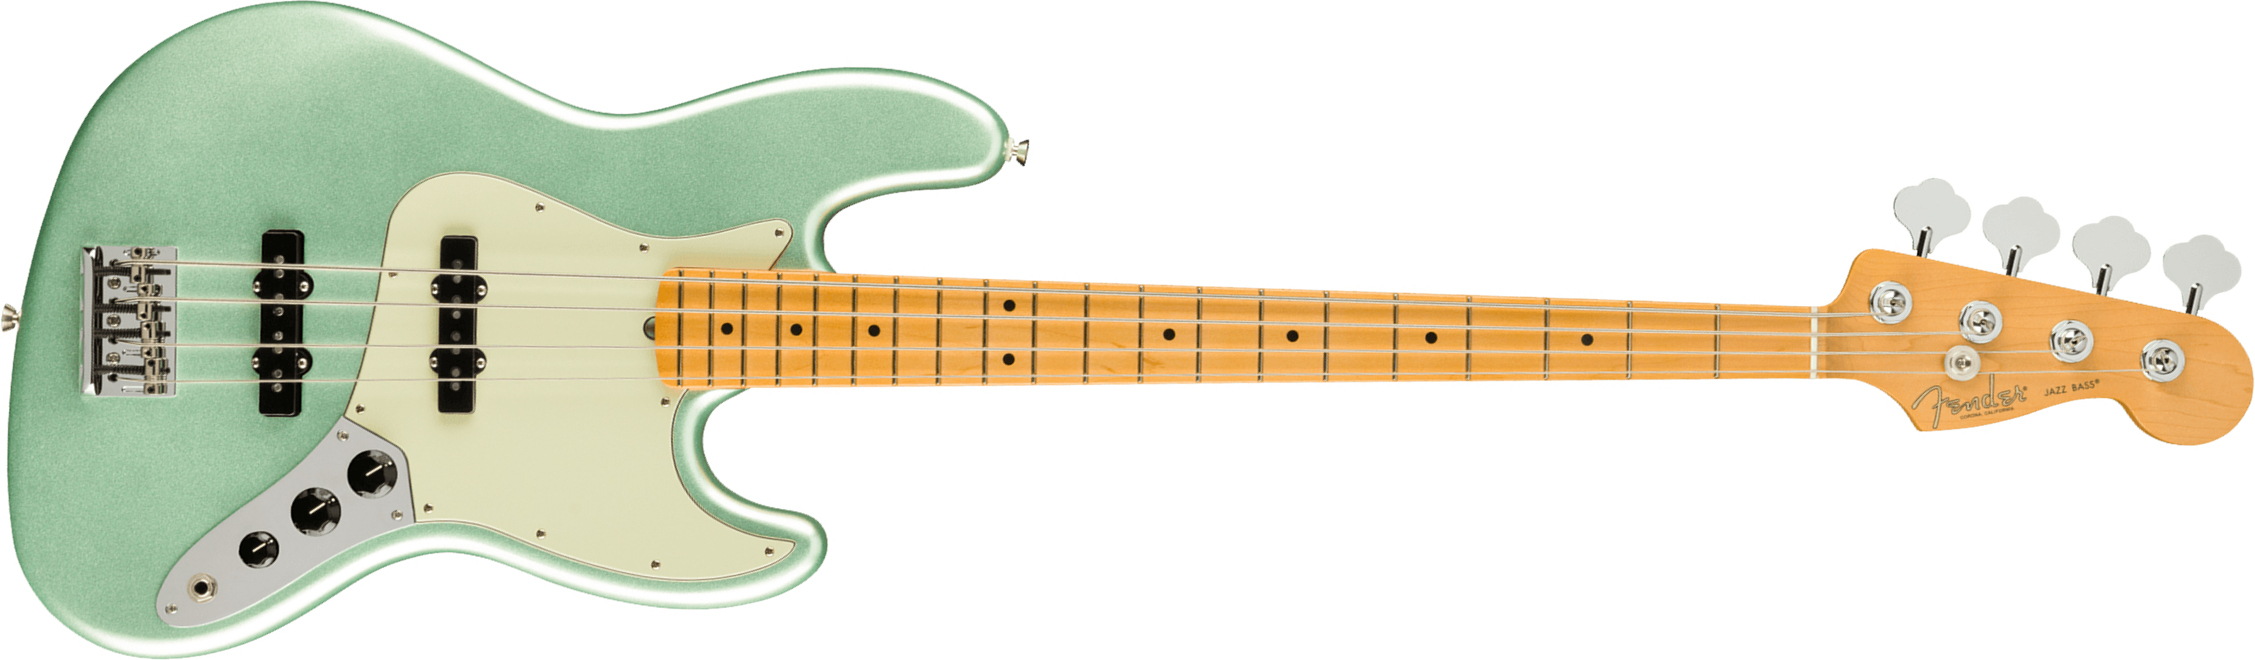 Fender Jazz Bass American Professional Ii Usa Mn - Mystic Surf Green - Solid body electric bass - Main picture